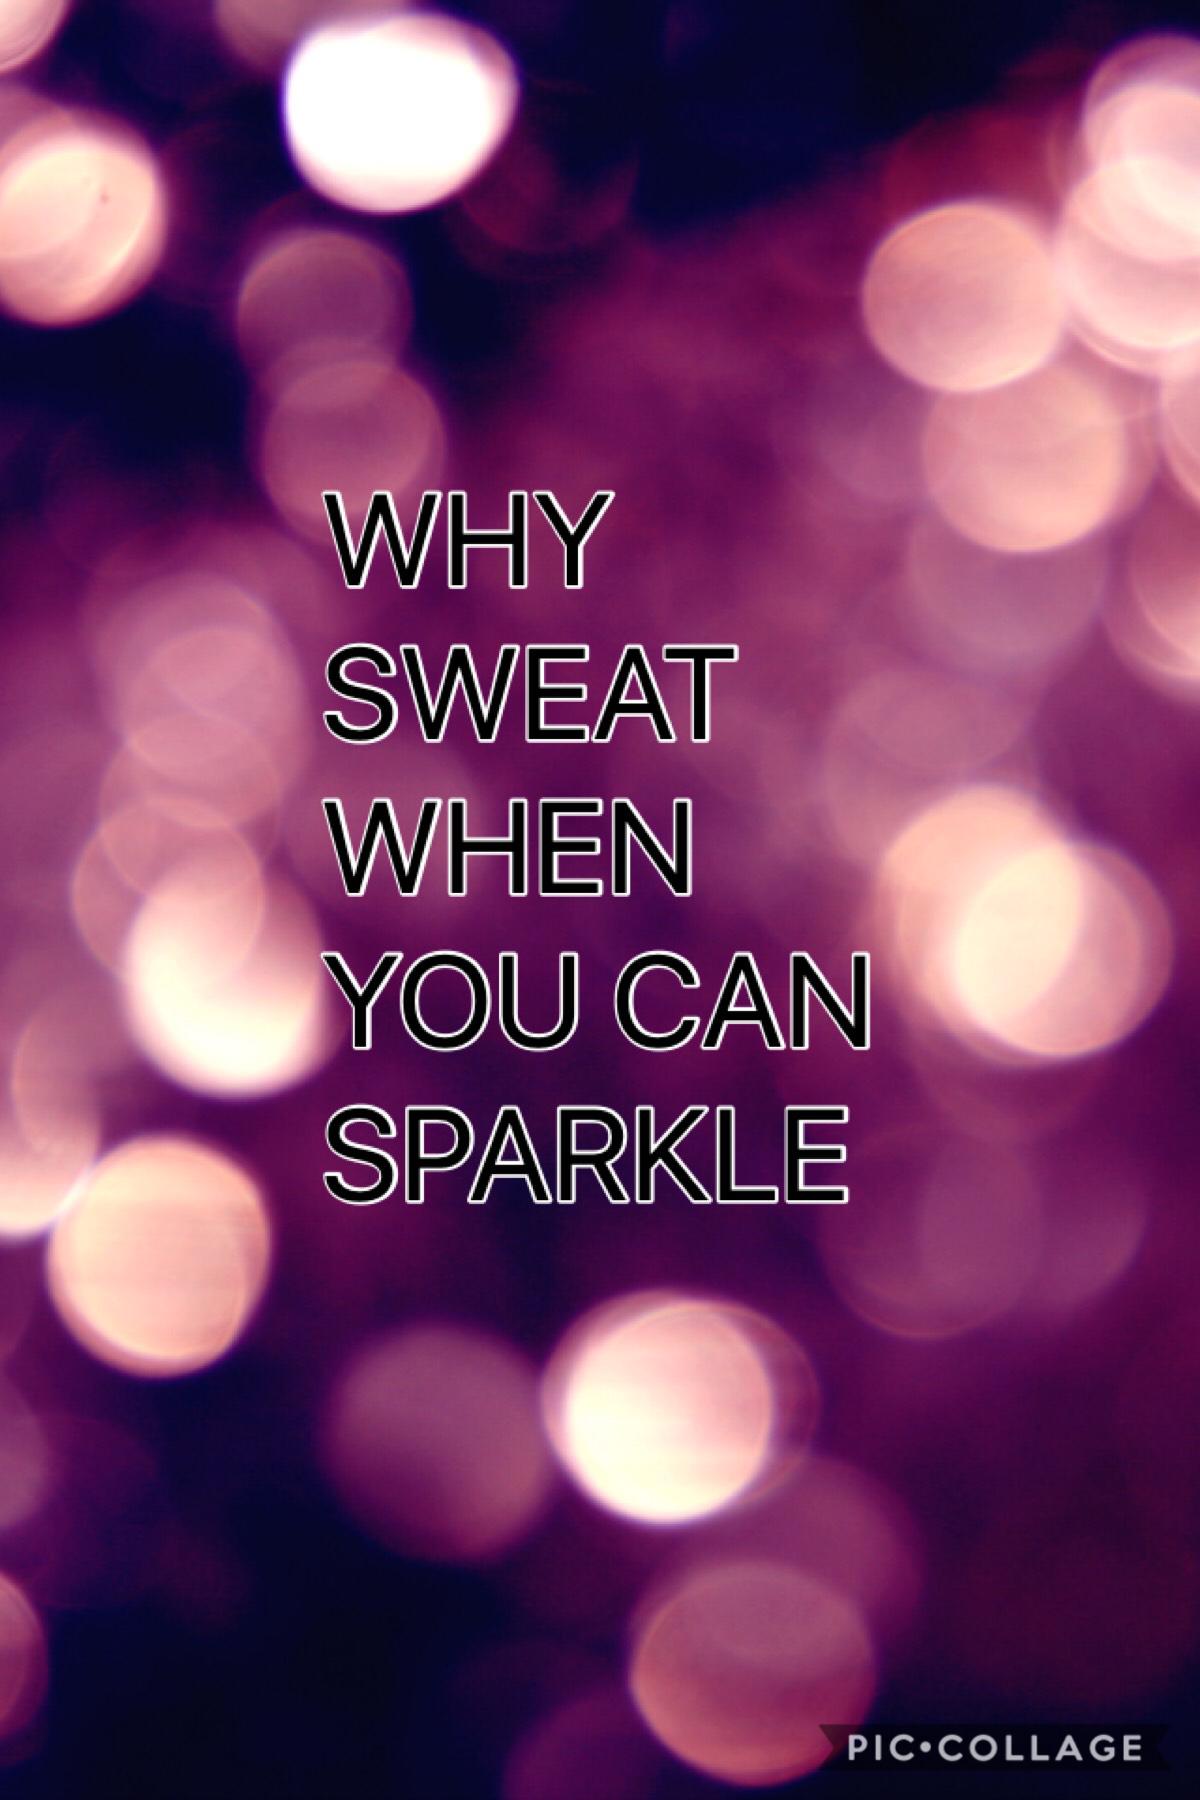 Why sweat when you can sparkle 